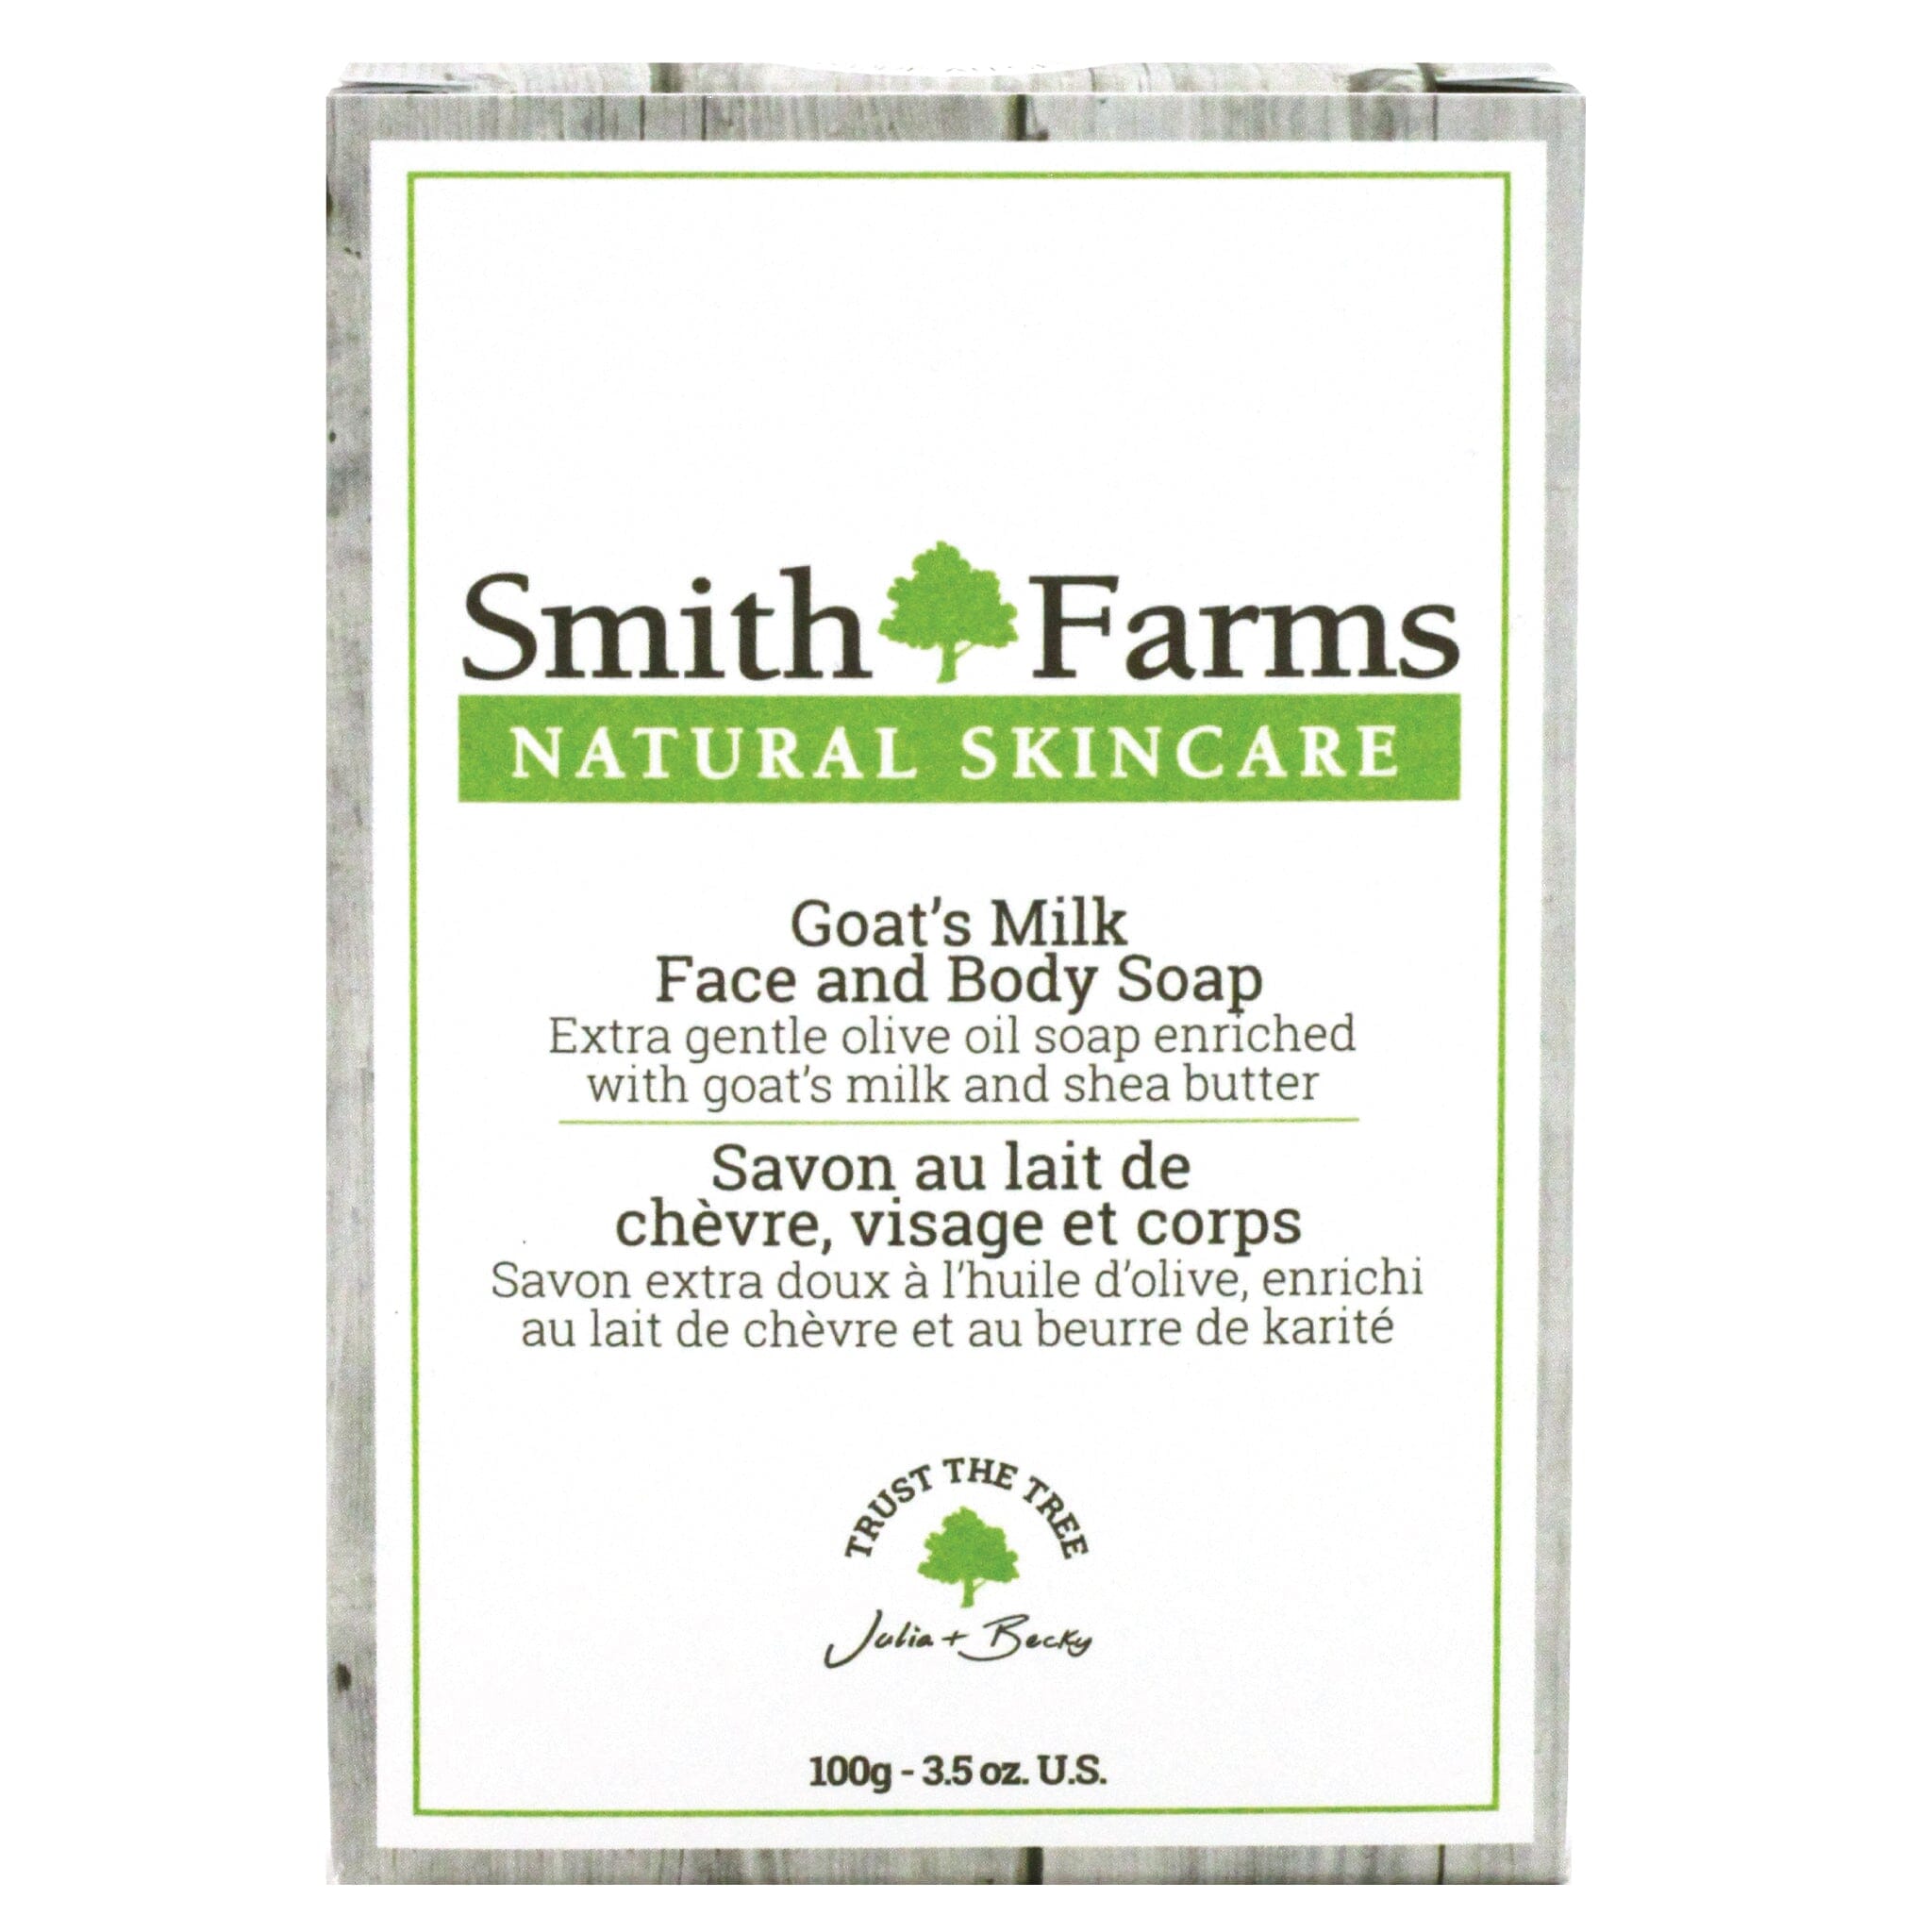 Goat's Milk Face and Body Soap Face Care,Body Care,Our Products Smith Farms 